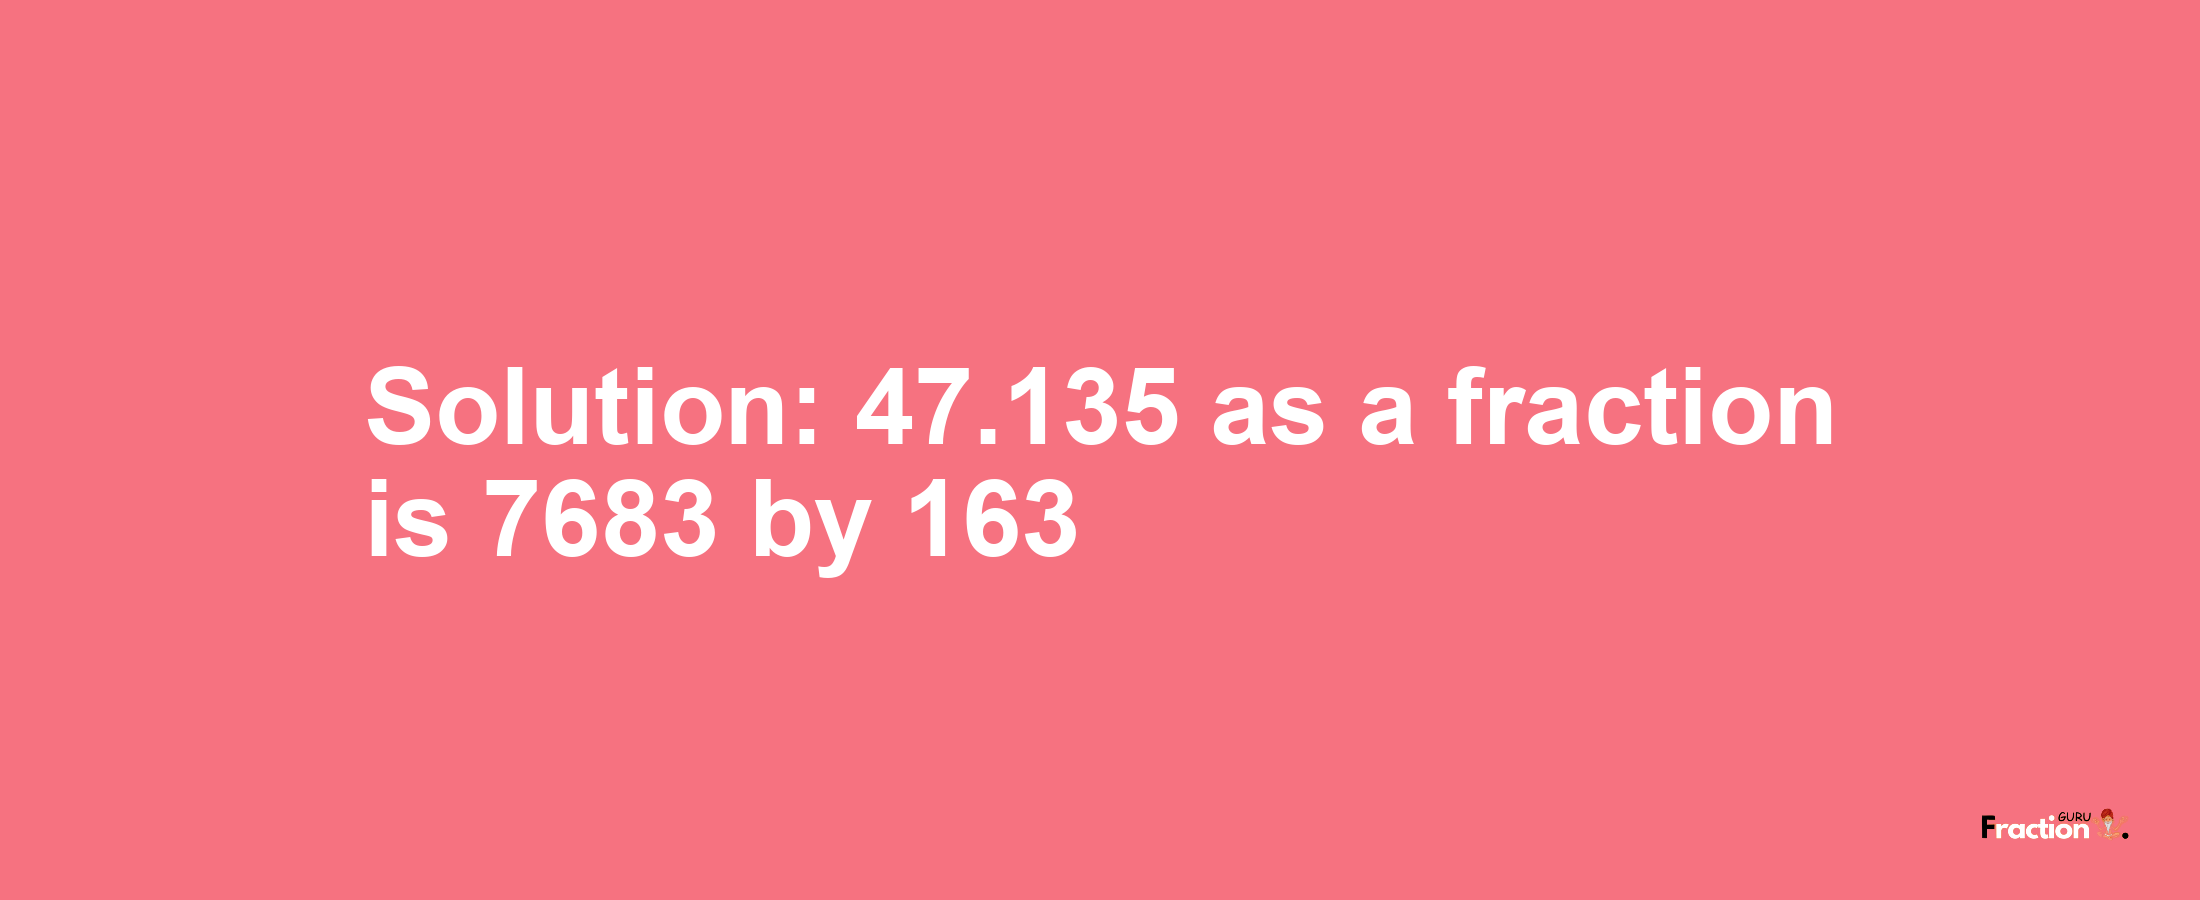 Solution:47.135 as a fraction is 7683/163